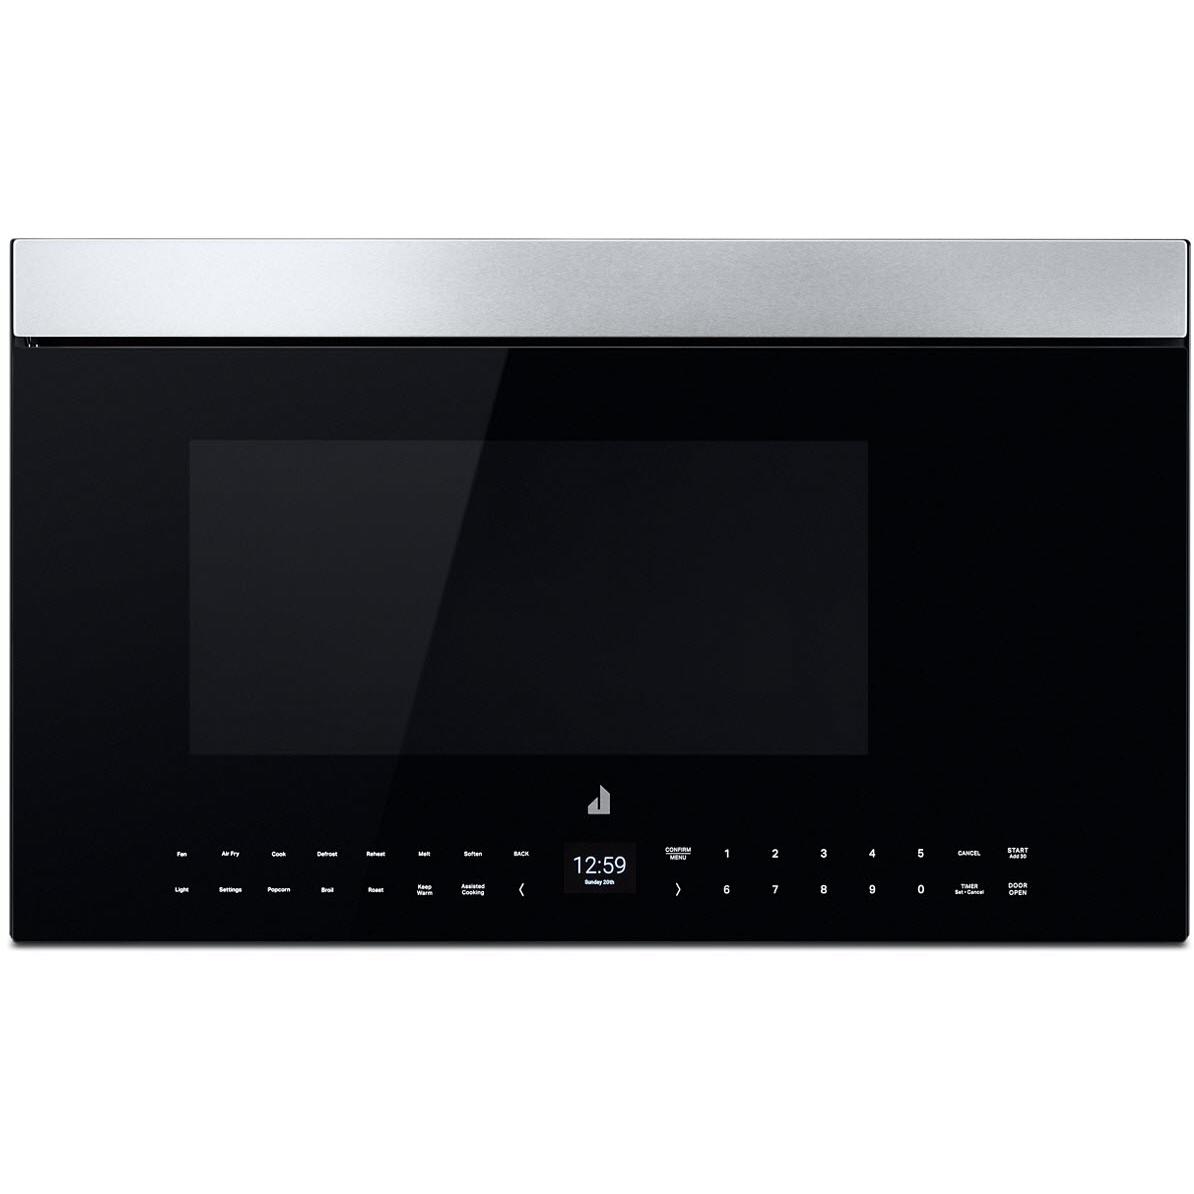 30-inch, 1.1 cu. ft. Over-the-Range Microwave Oven with Air Fry Technology YJMHF730RBL IMAGE 1